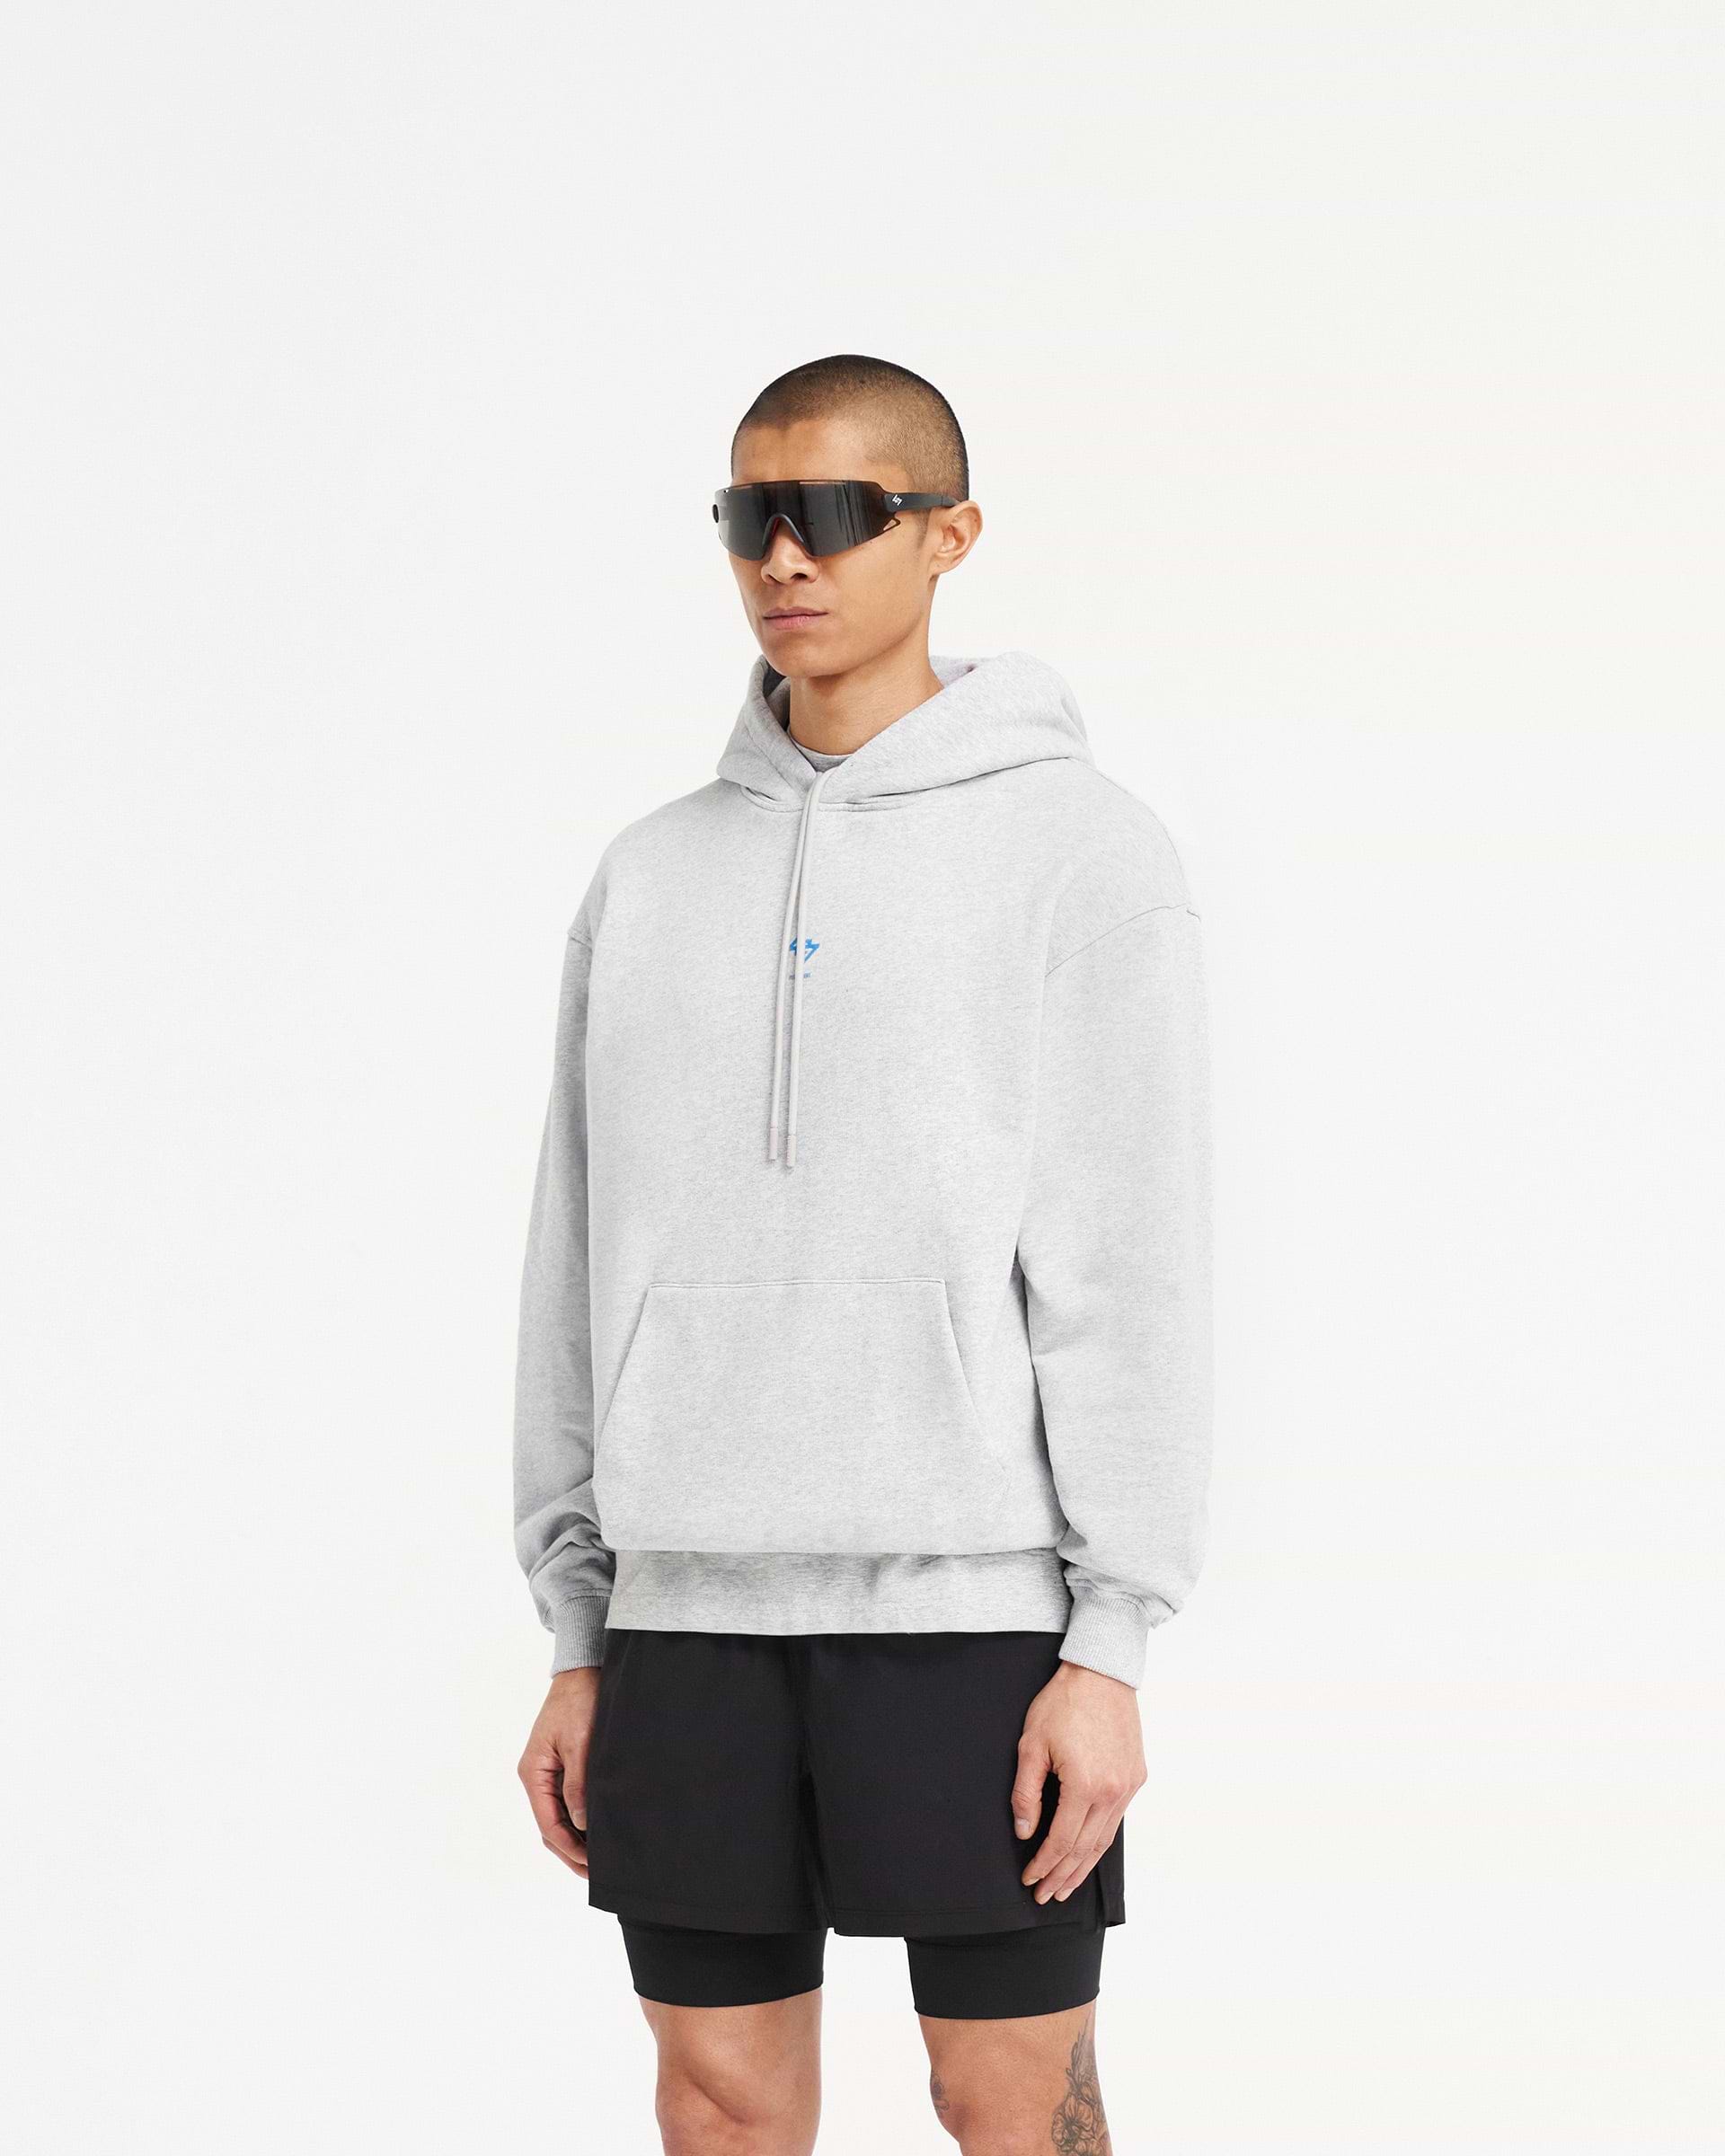 247 Oversized Hoodie - Ash Grey Electric Blue